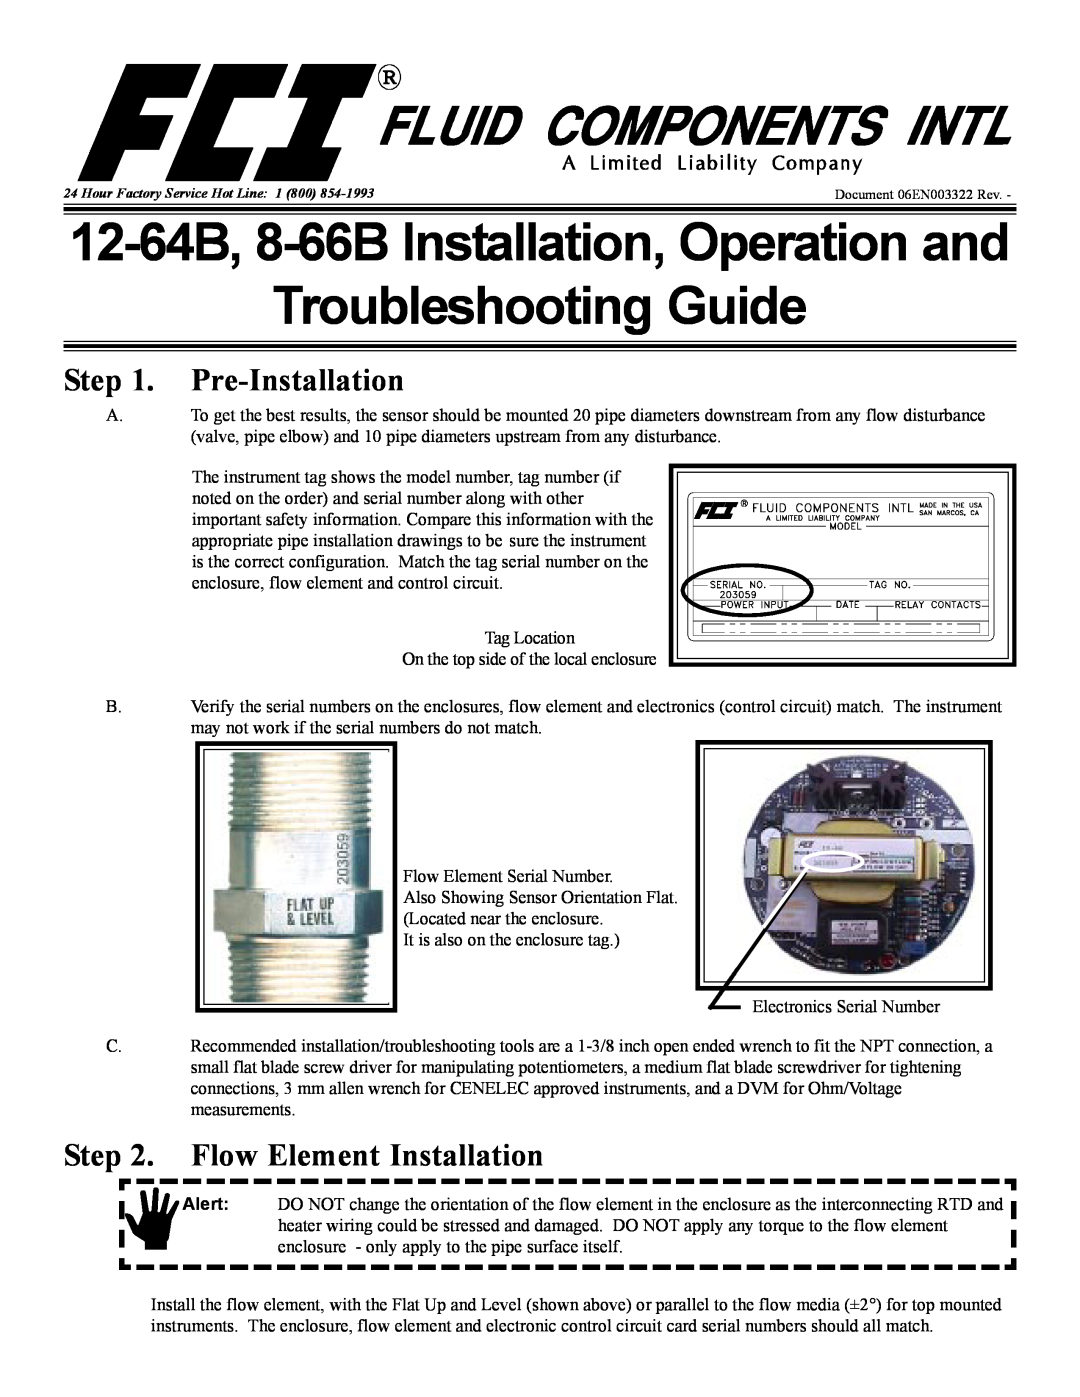 FCI Home Appliances 12-64B, 8-66B manual Pre-Installation, Flow Element Installation, Troubleshooting Guide 